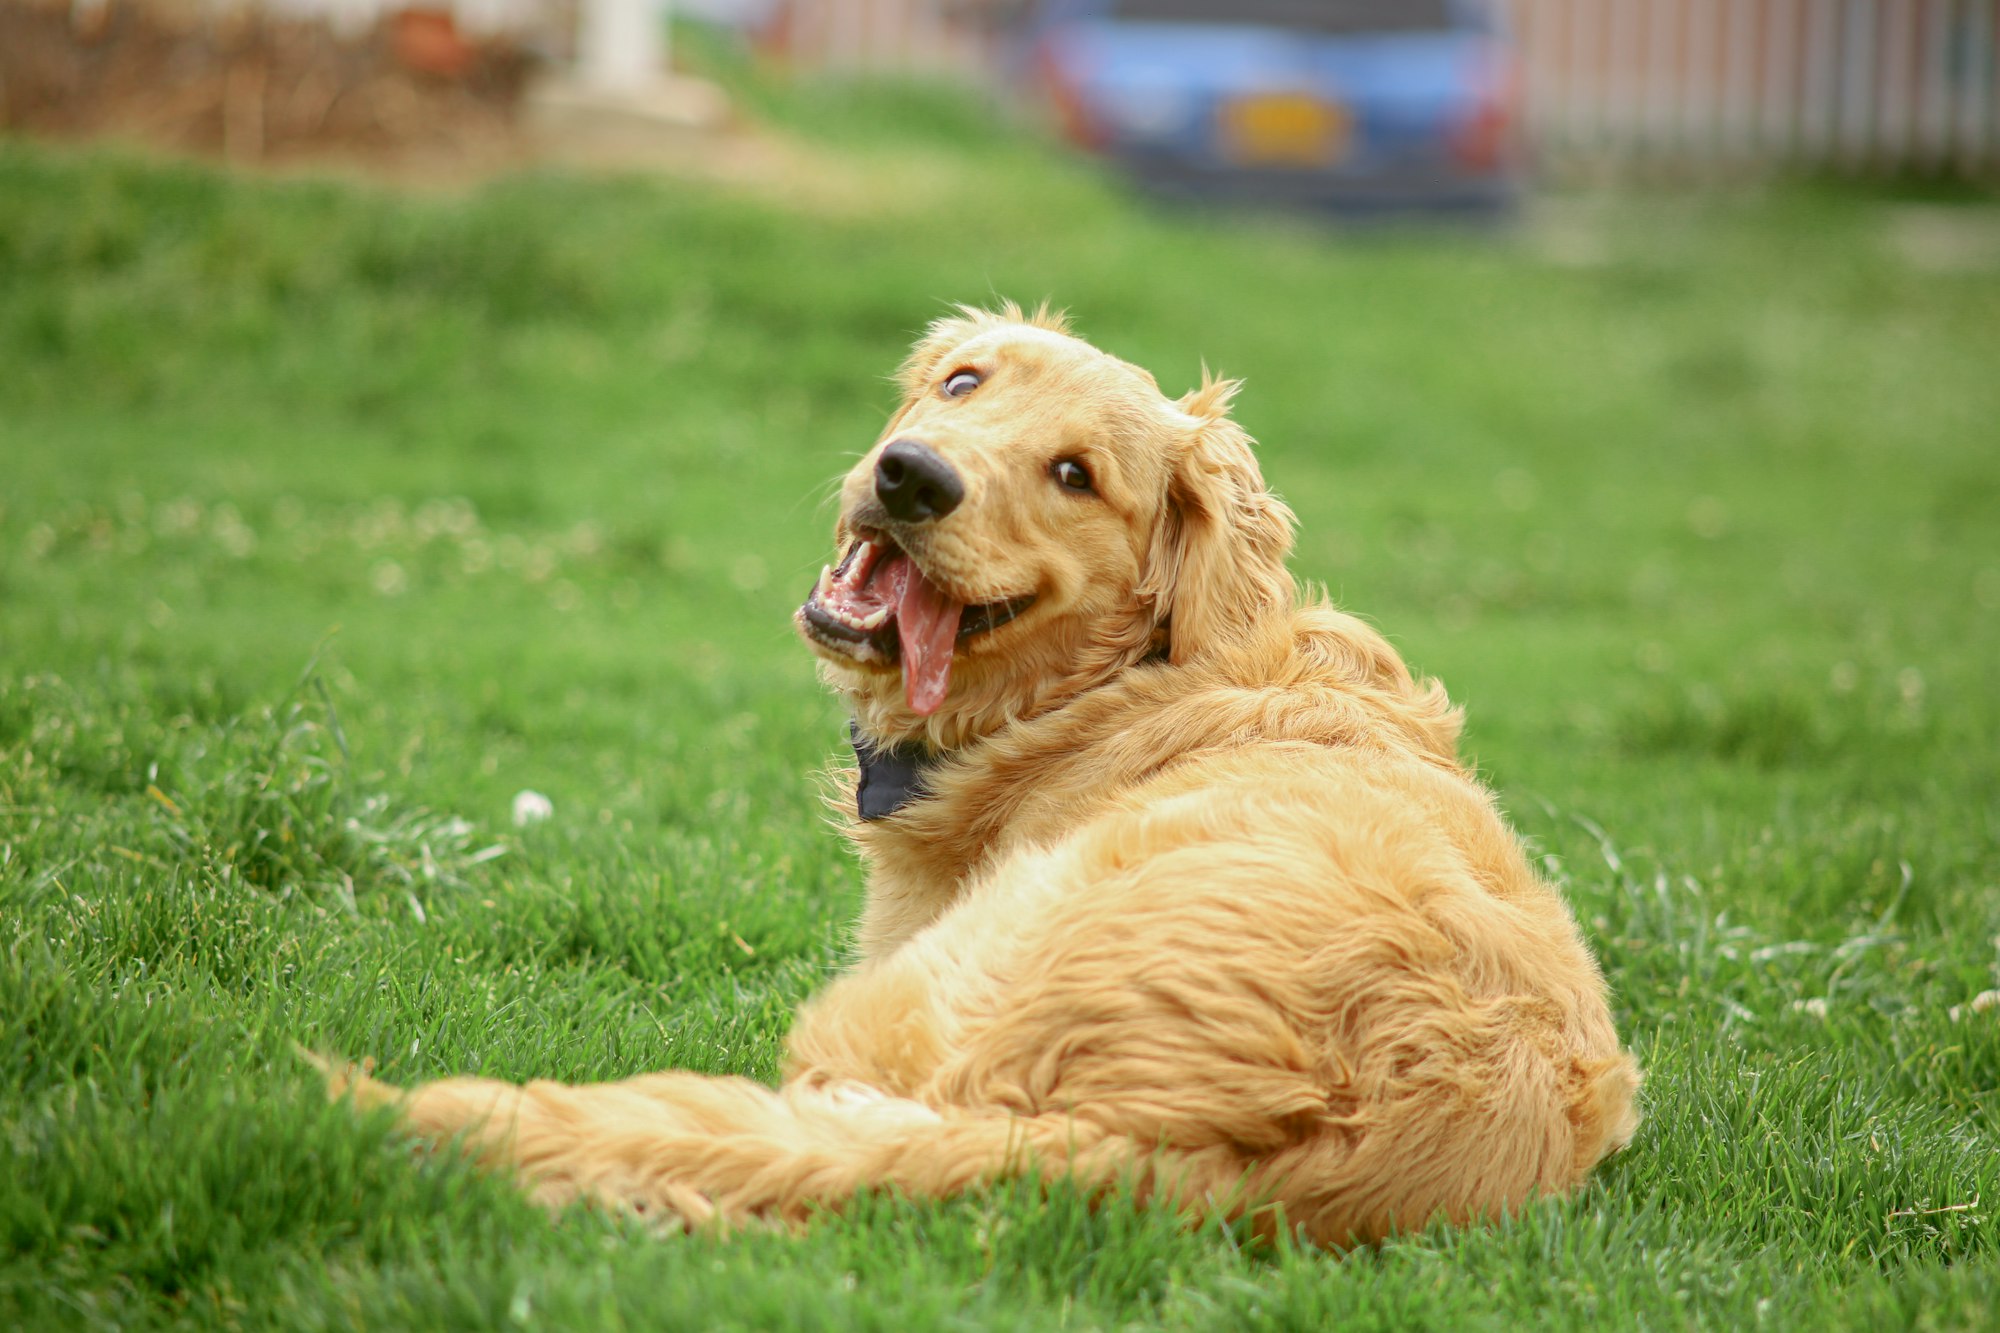 Symptoms of Heartworms in Dogs